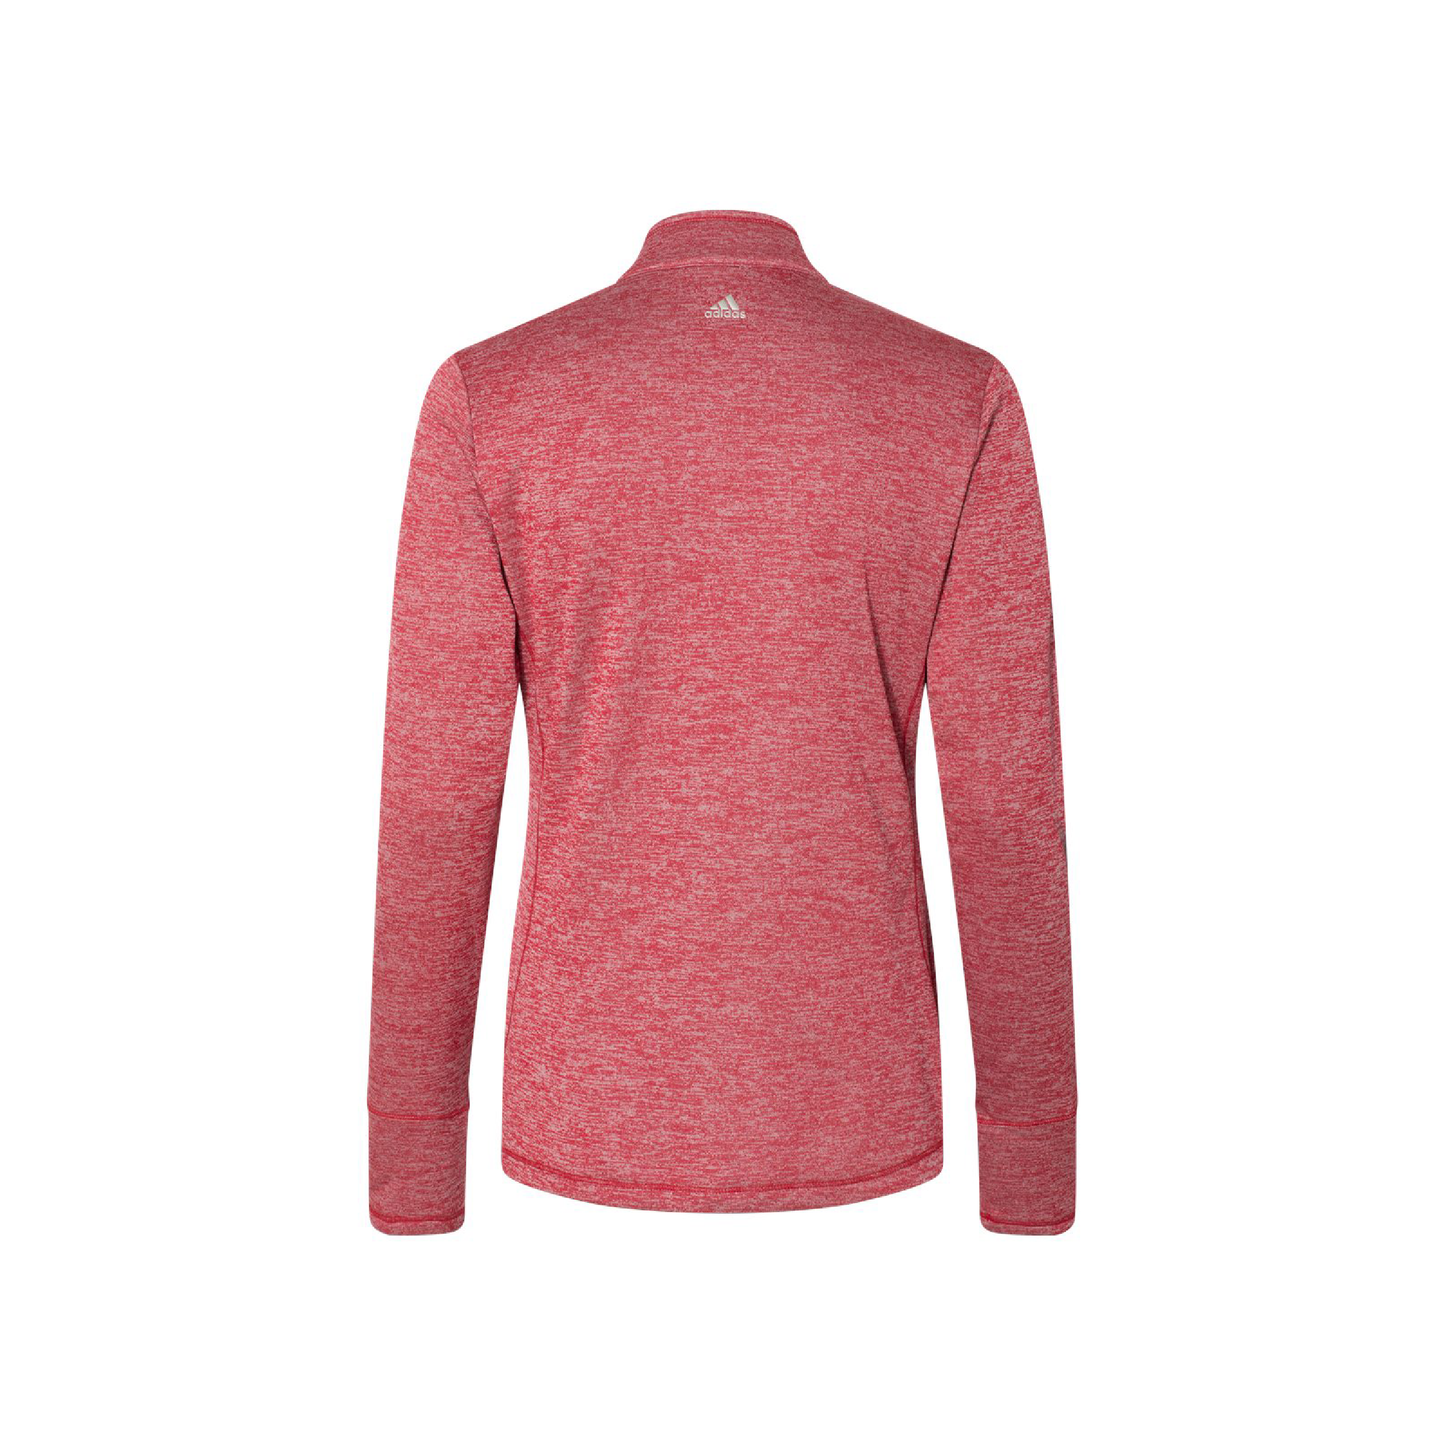 CIFA Adidas Women's Brushed Terry Quarter-Zip Pullover